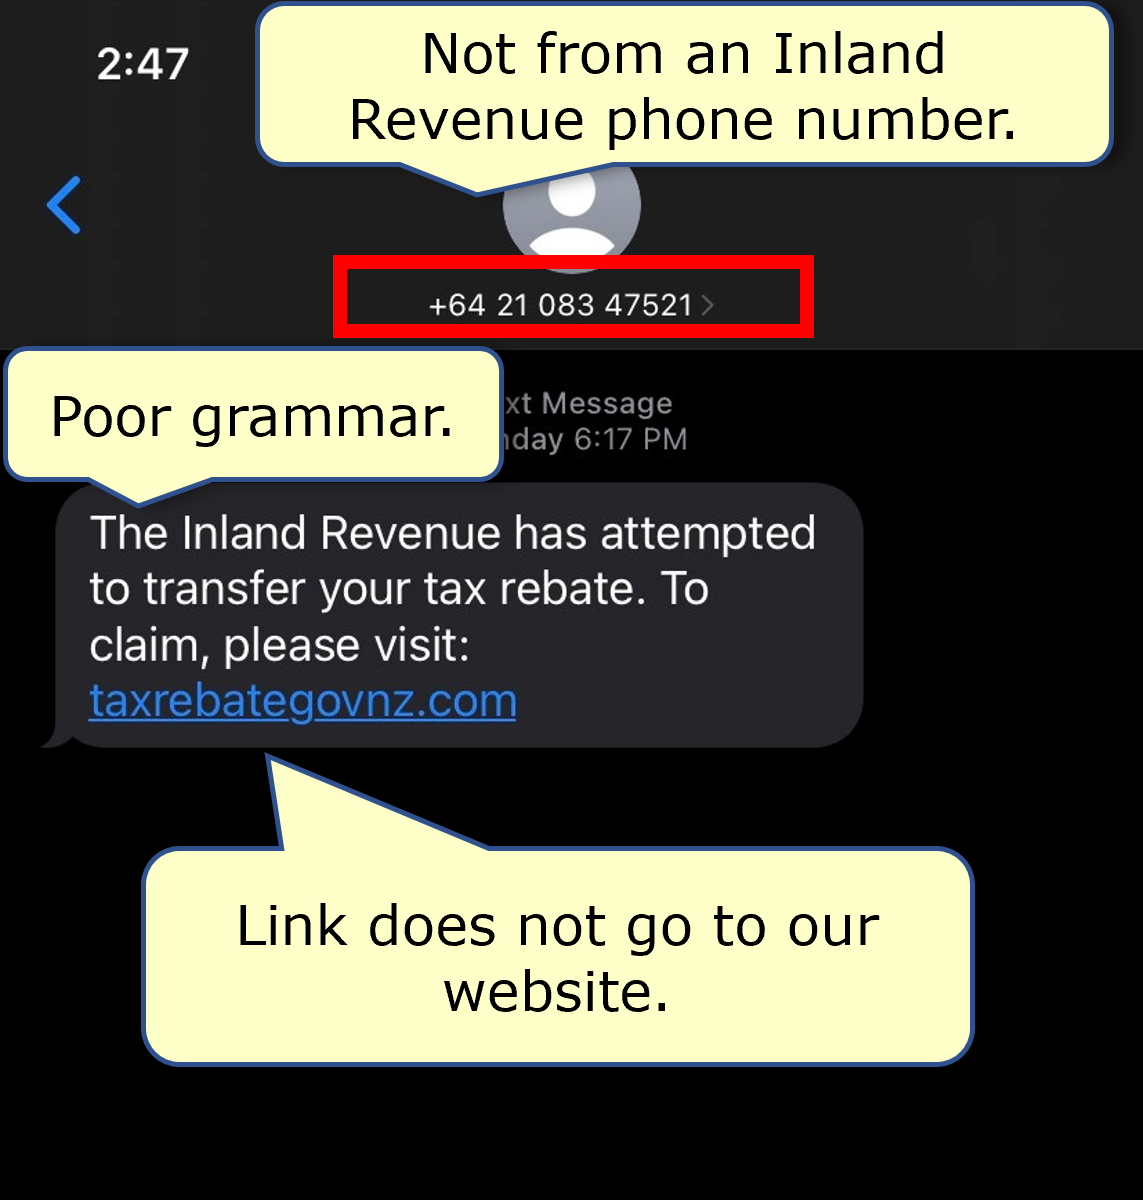 A poorly written text scam that is not from any of our numbers with a link that does not go to our website.